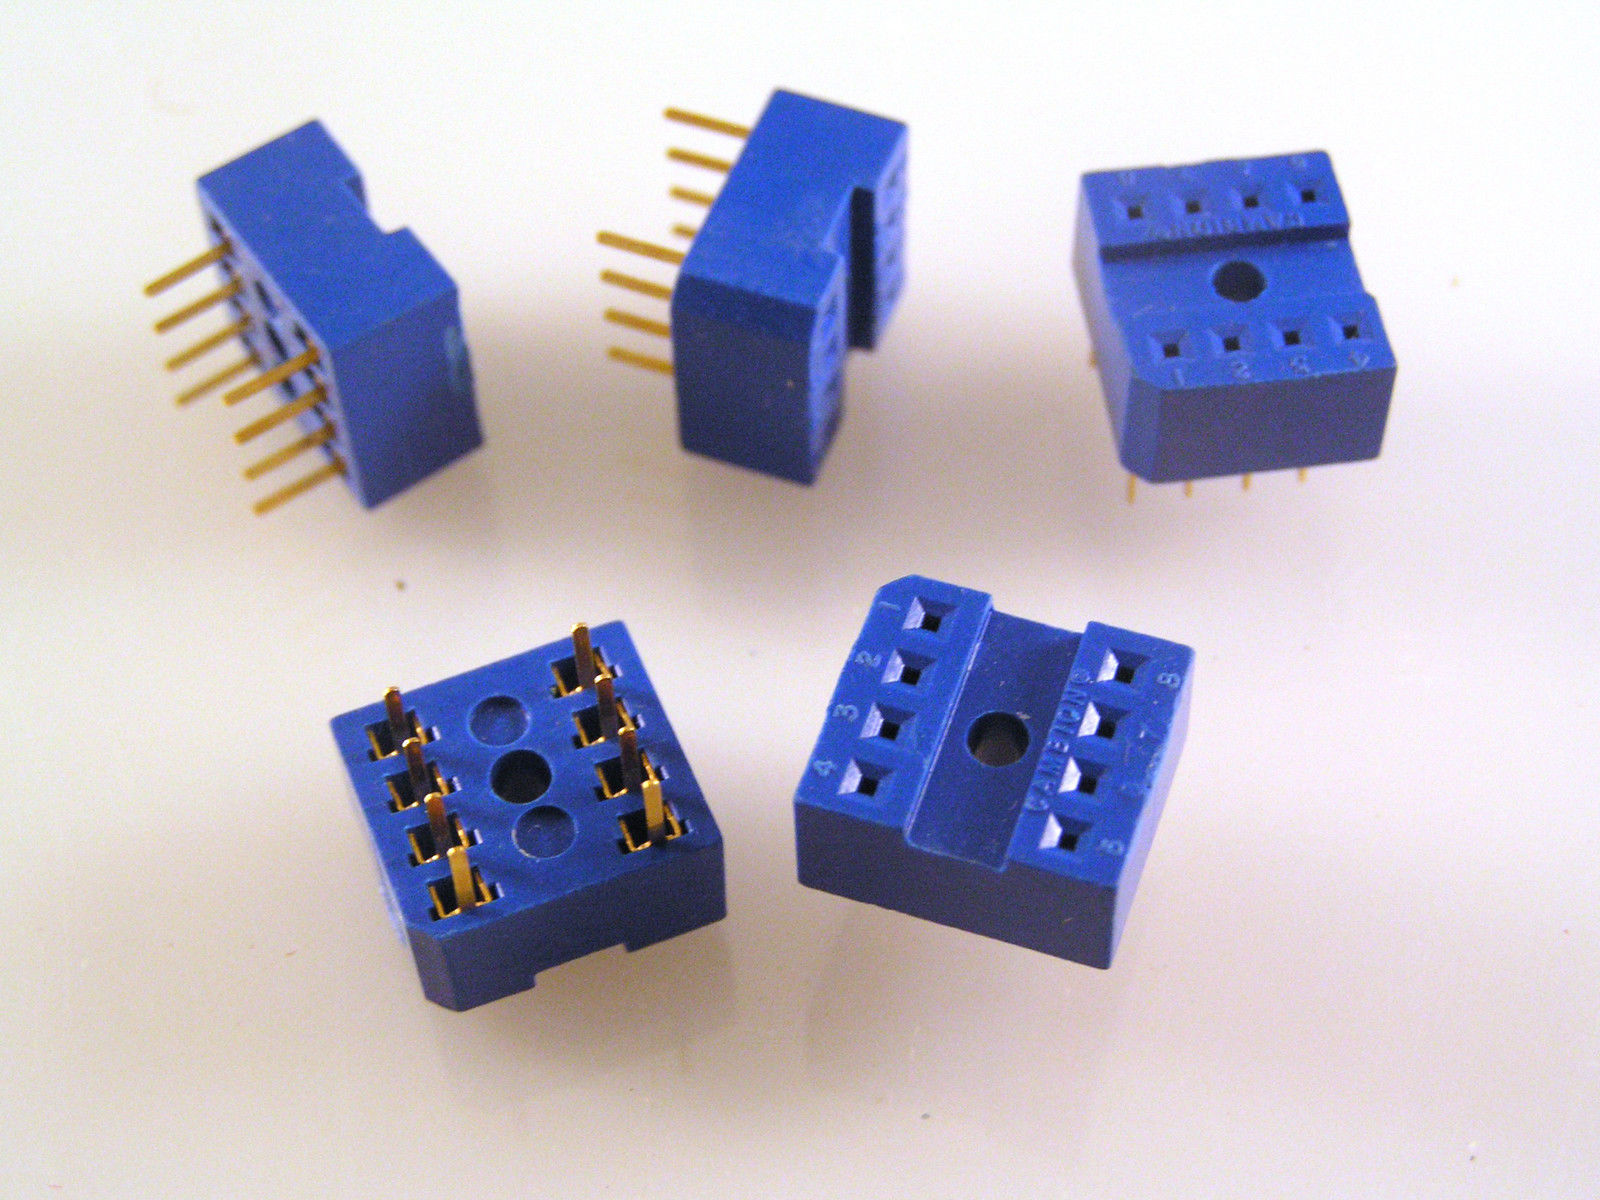 Cambion 702 DIL IC Socket 8 Way Gold Pins 0.3in Pitch Blue 5 Pieces OMA099